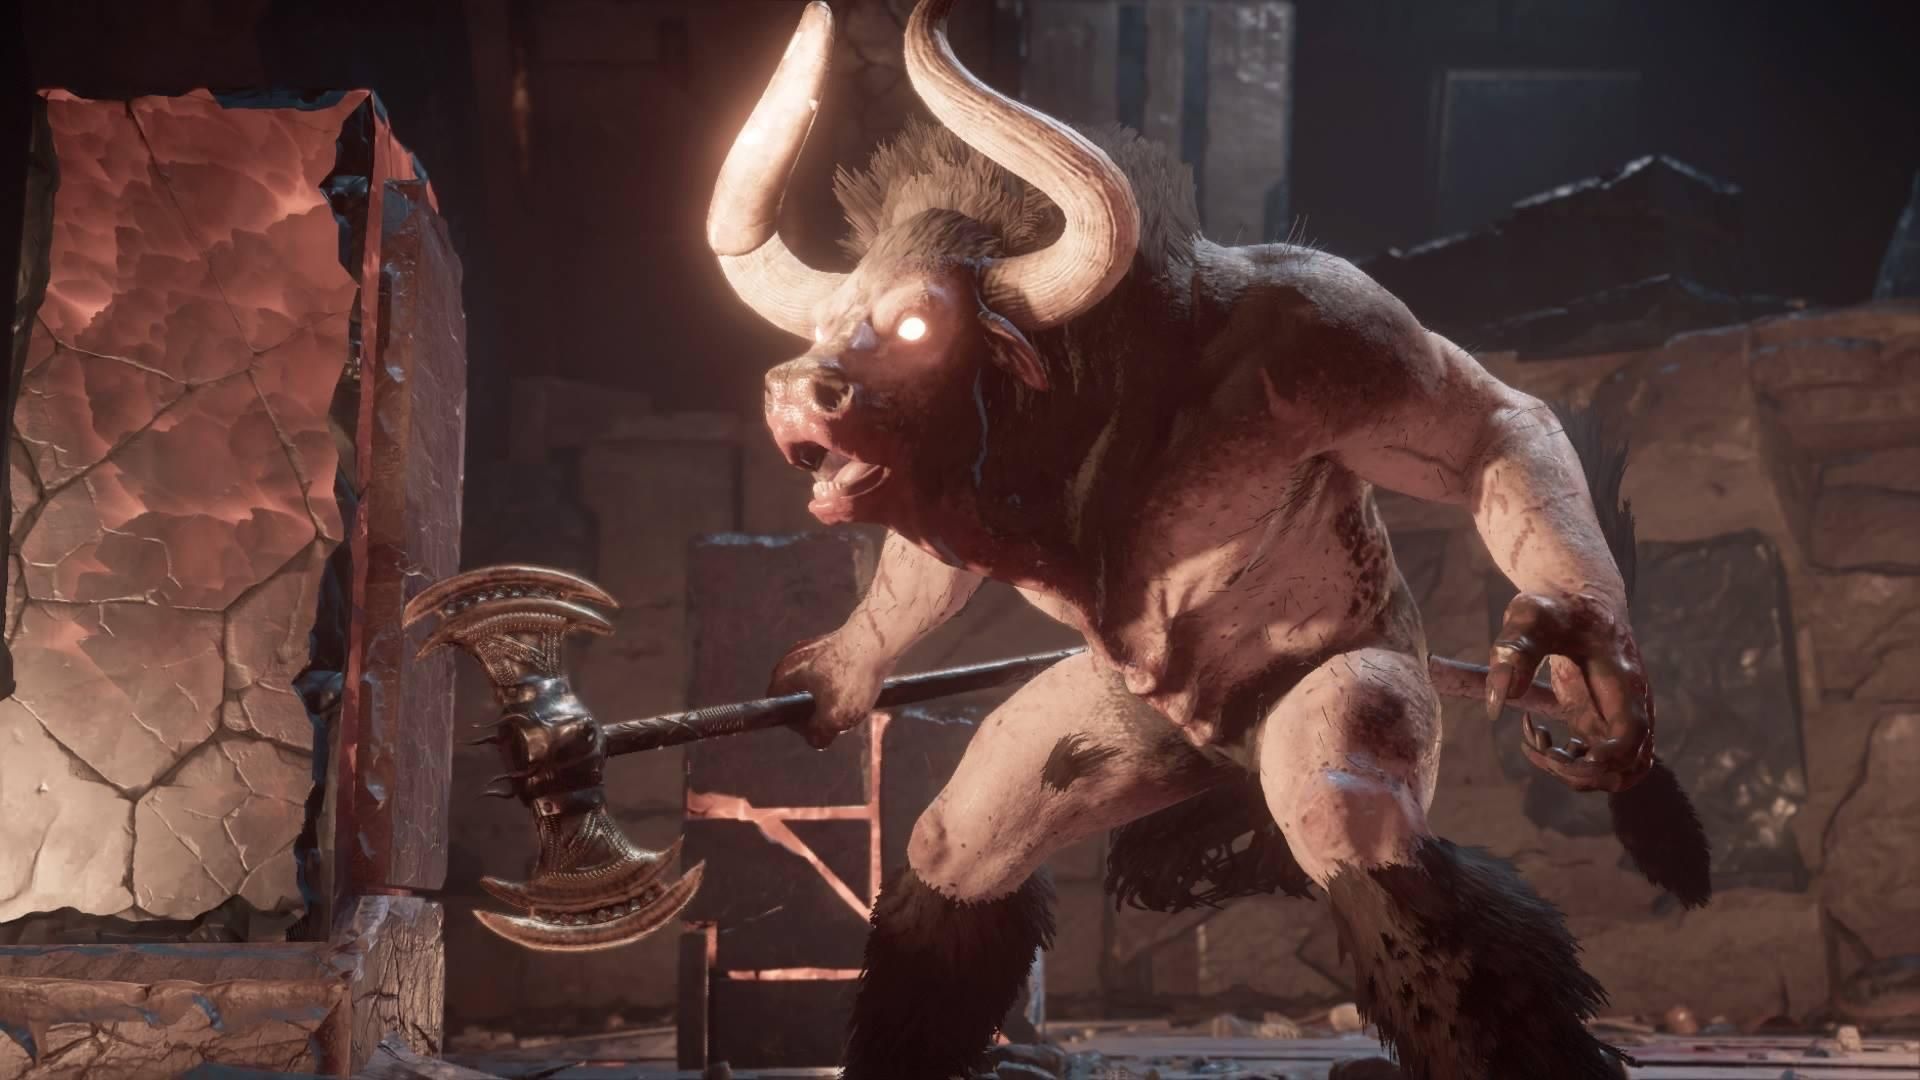 Assassins Creed Odyssey A Guide To Every Mythical Creature Boss Fight (&How To Beat Them Easily)